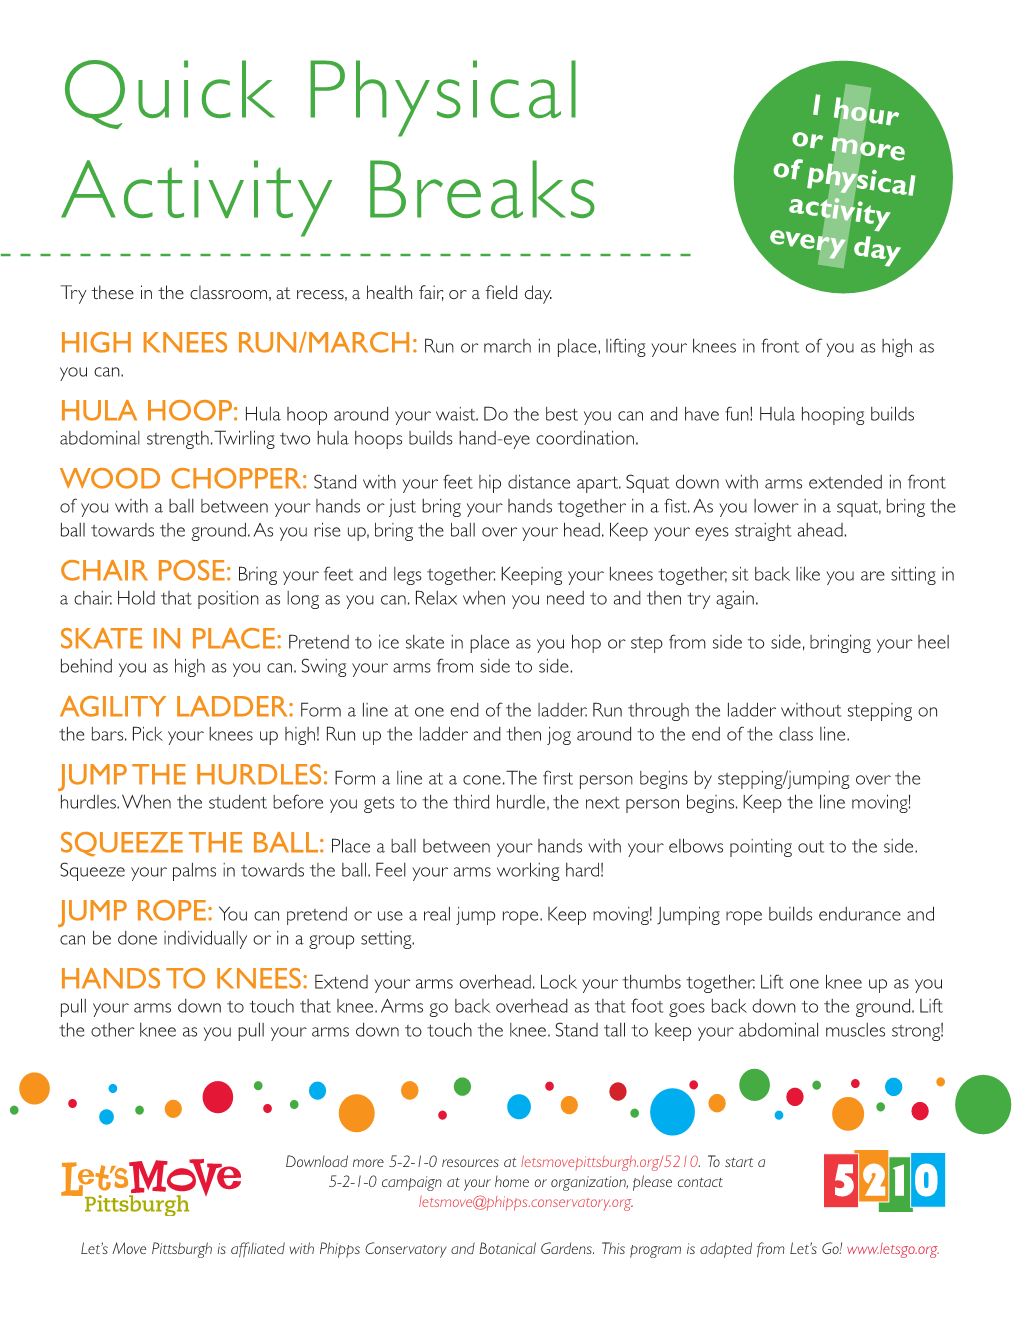 Quick Physical Activity Breaks